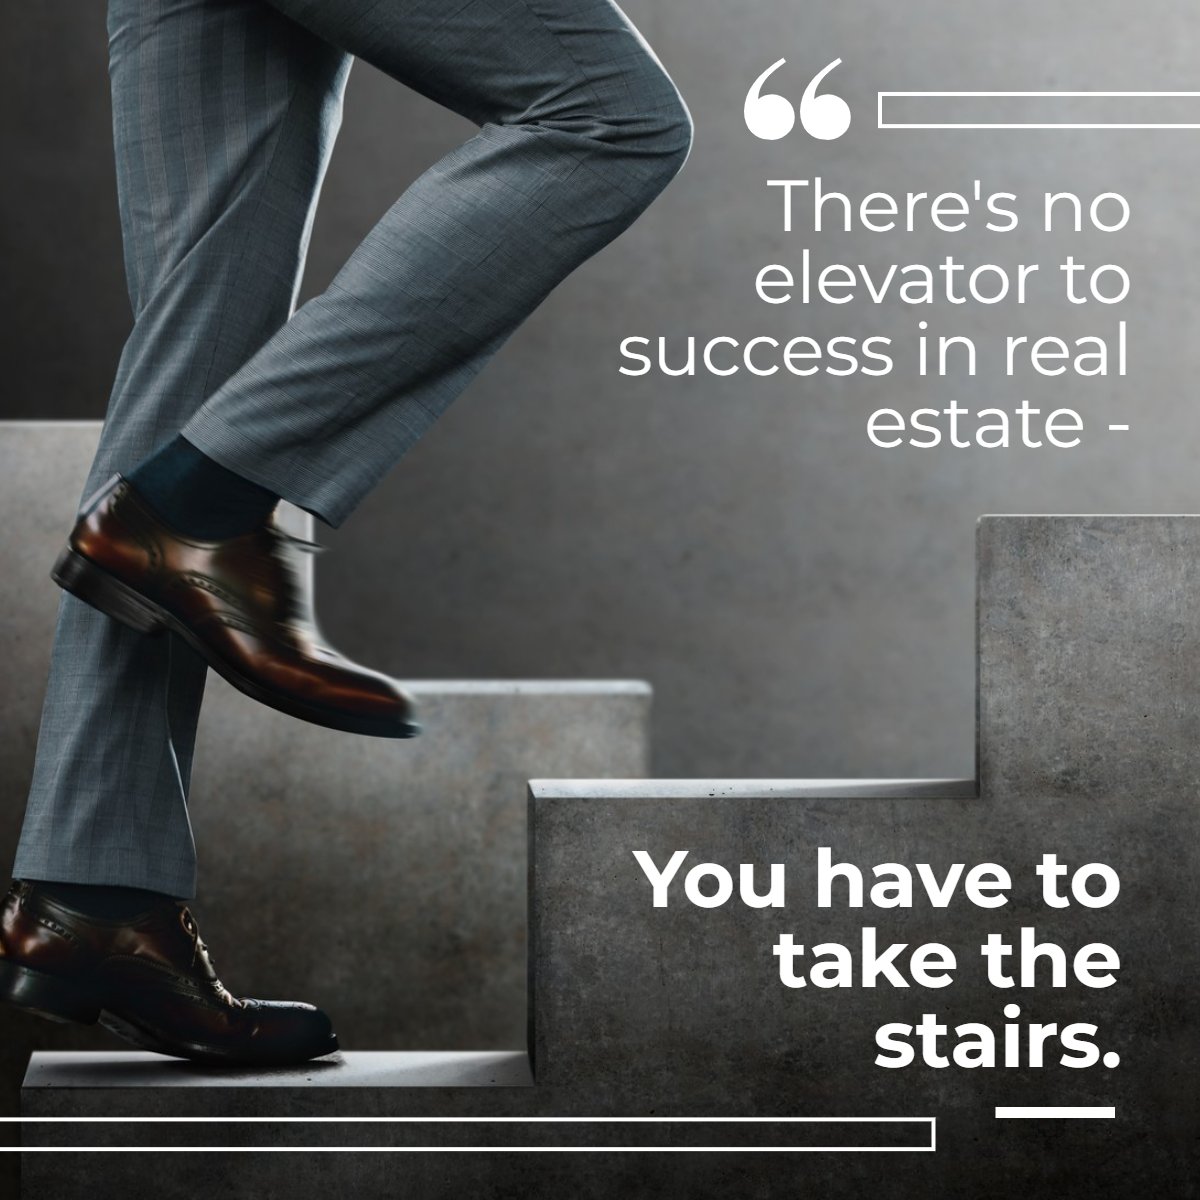 Every level of success opens up new opportunities for us to grow and learn.

The view from the top justifies every step taken to get there!

#RealEstateQuote #RealEstateQuotes #RealEstateLife 
 #AmericasMortgageSolutions #christianpenner #onestopbrokershop